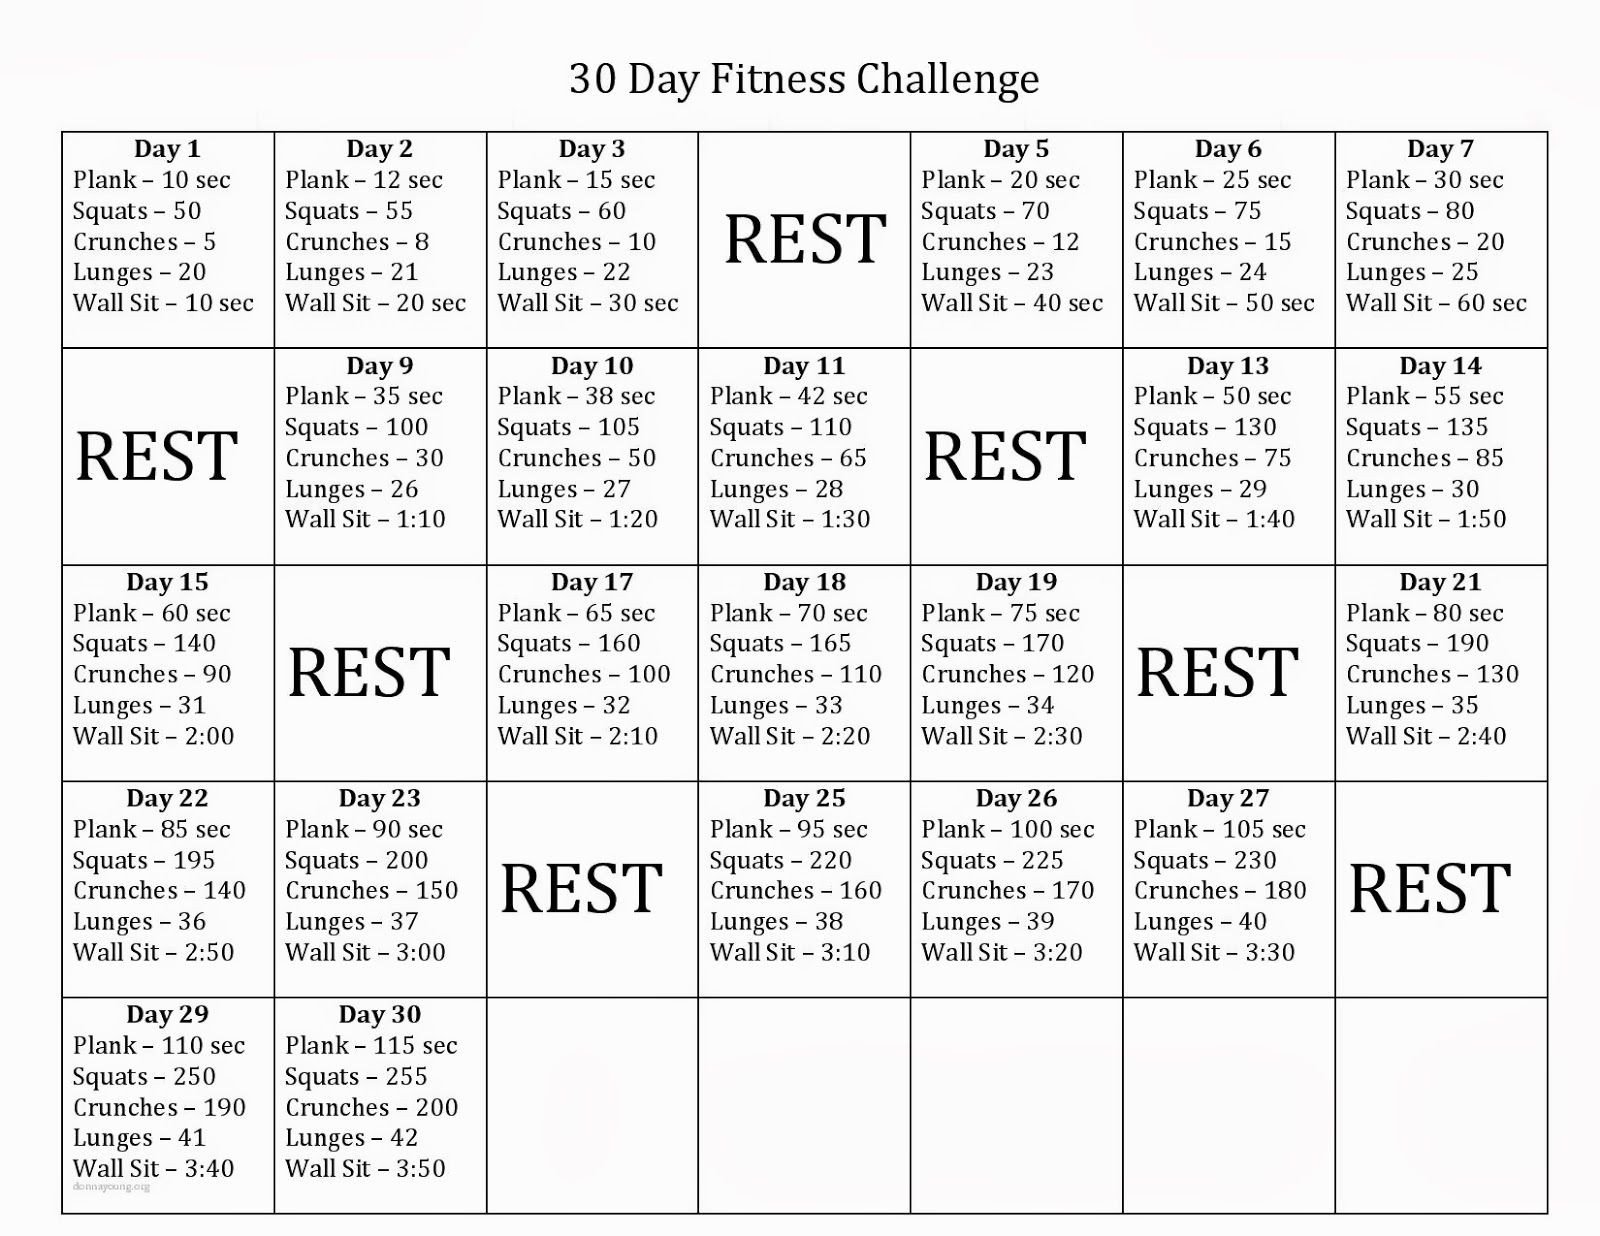 30 Day Fitness Challenge might make this 60 days and do